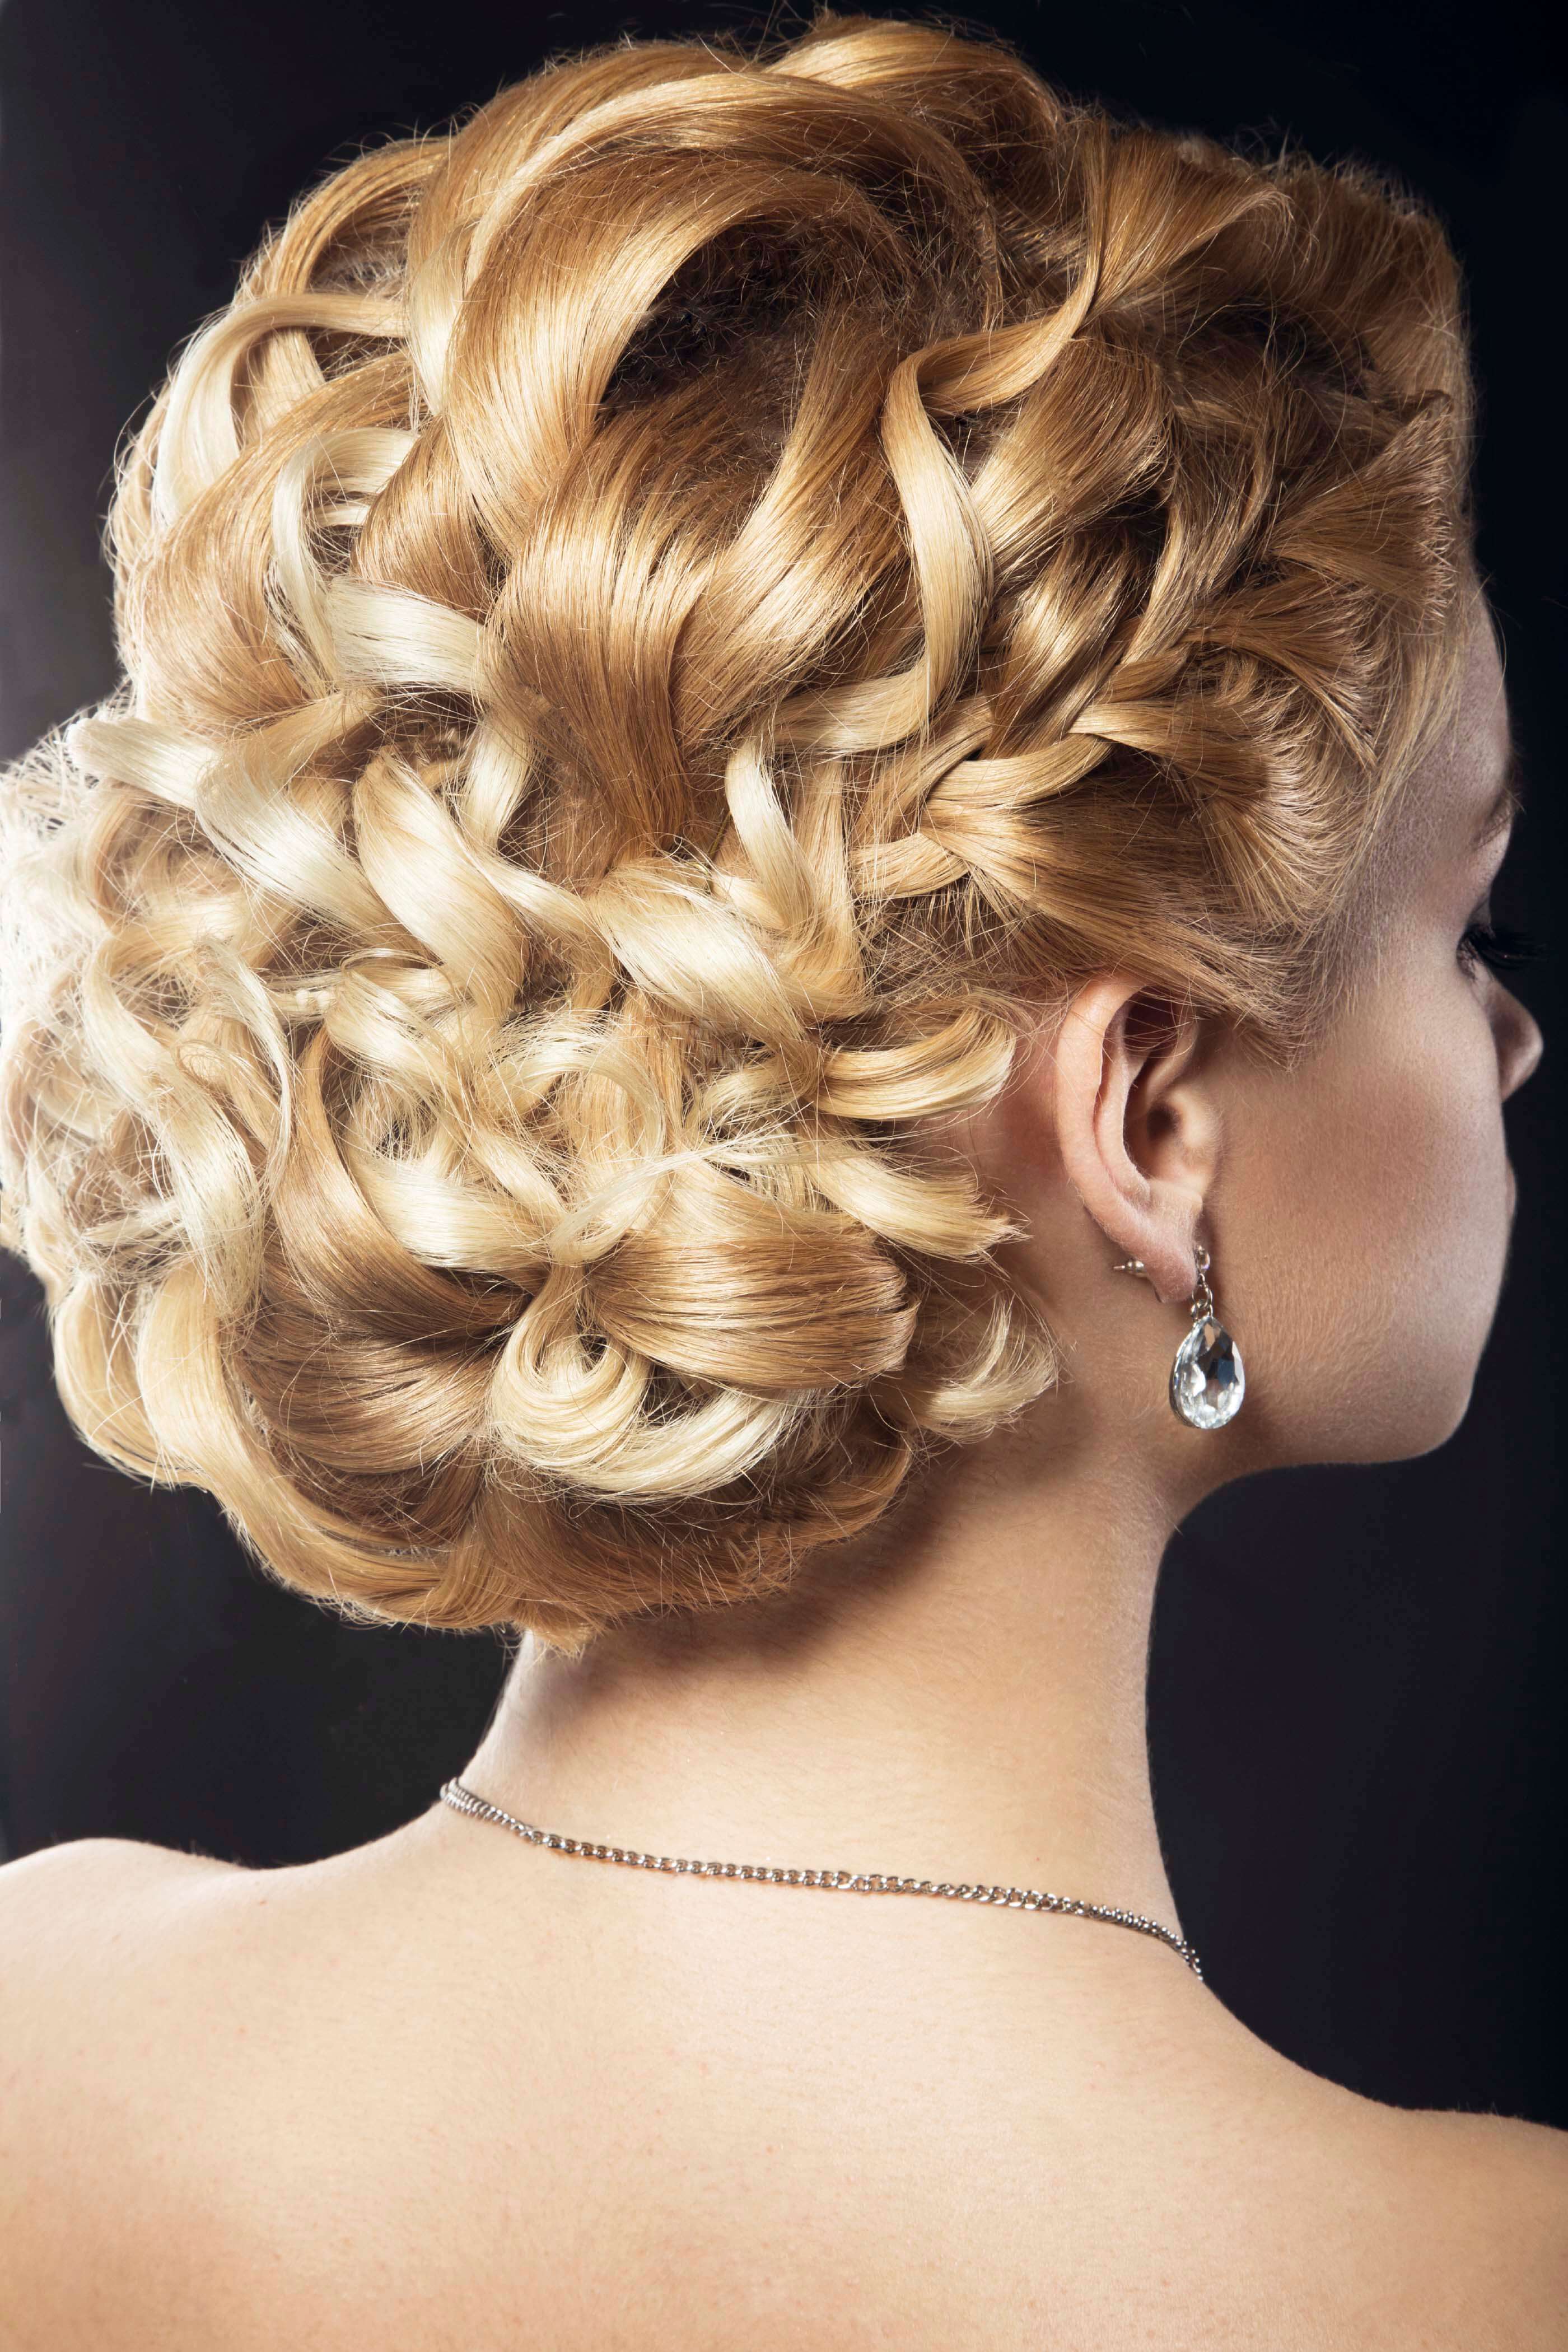 25 + Curly Updo Hairstyles Flaunt Your Curls and Create a New Style